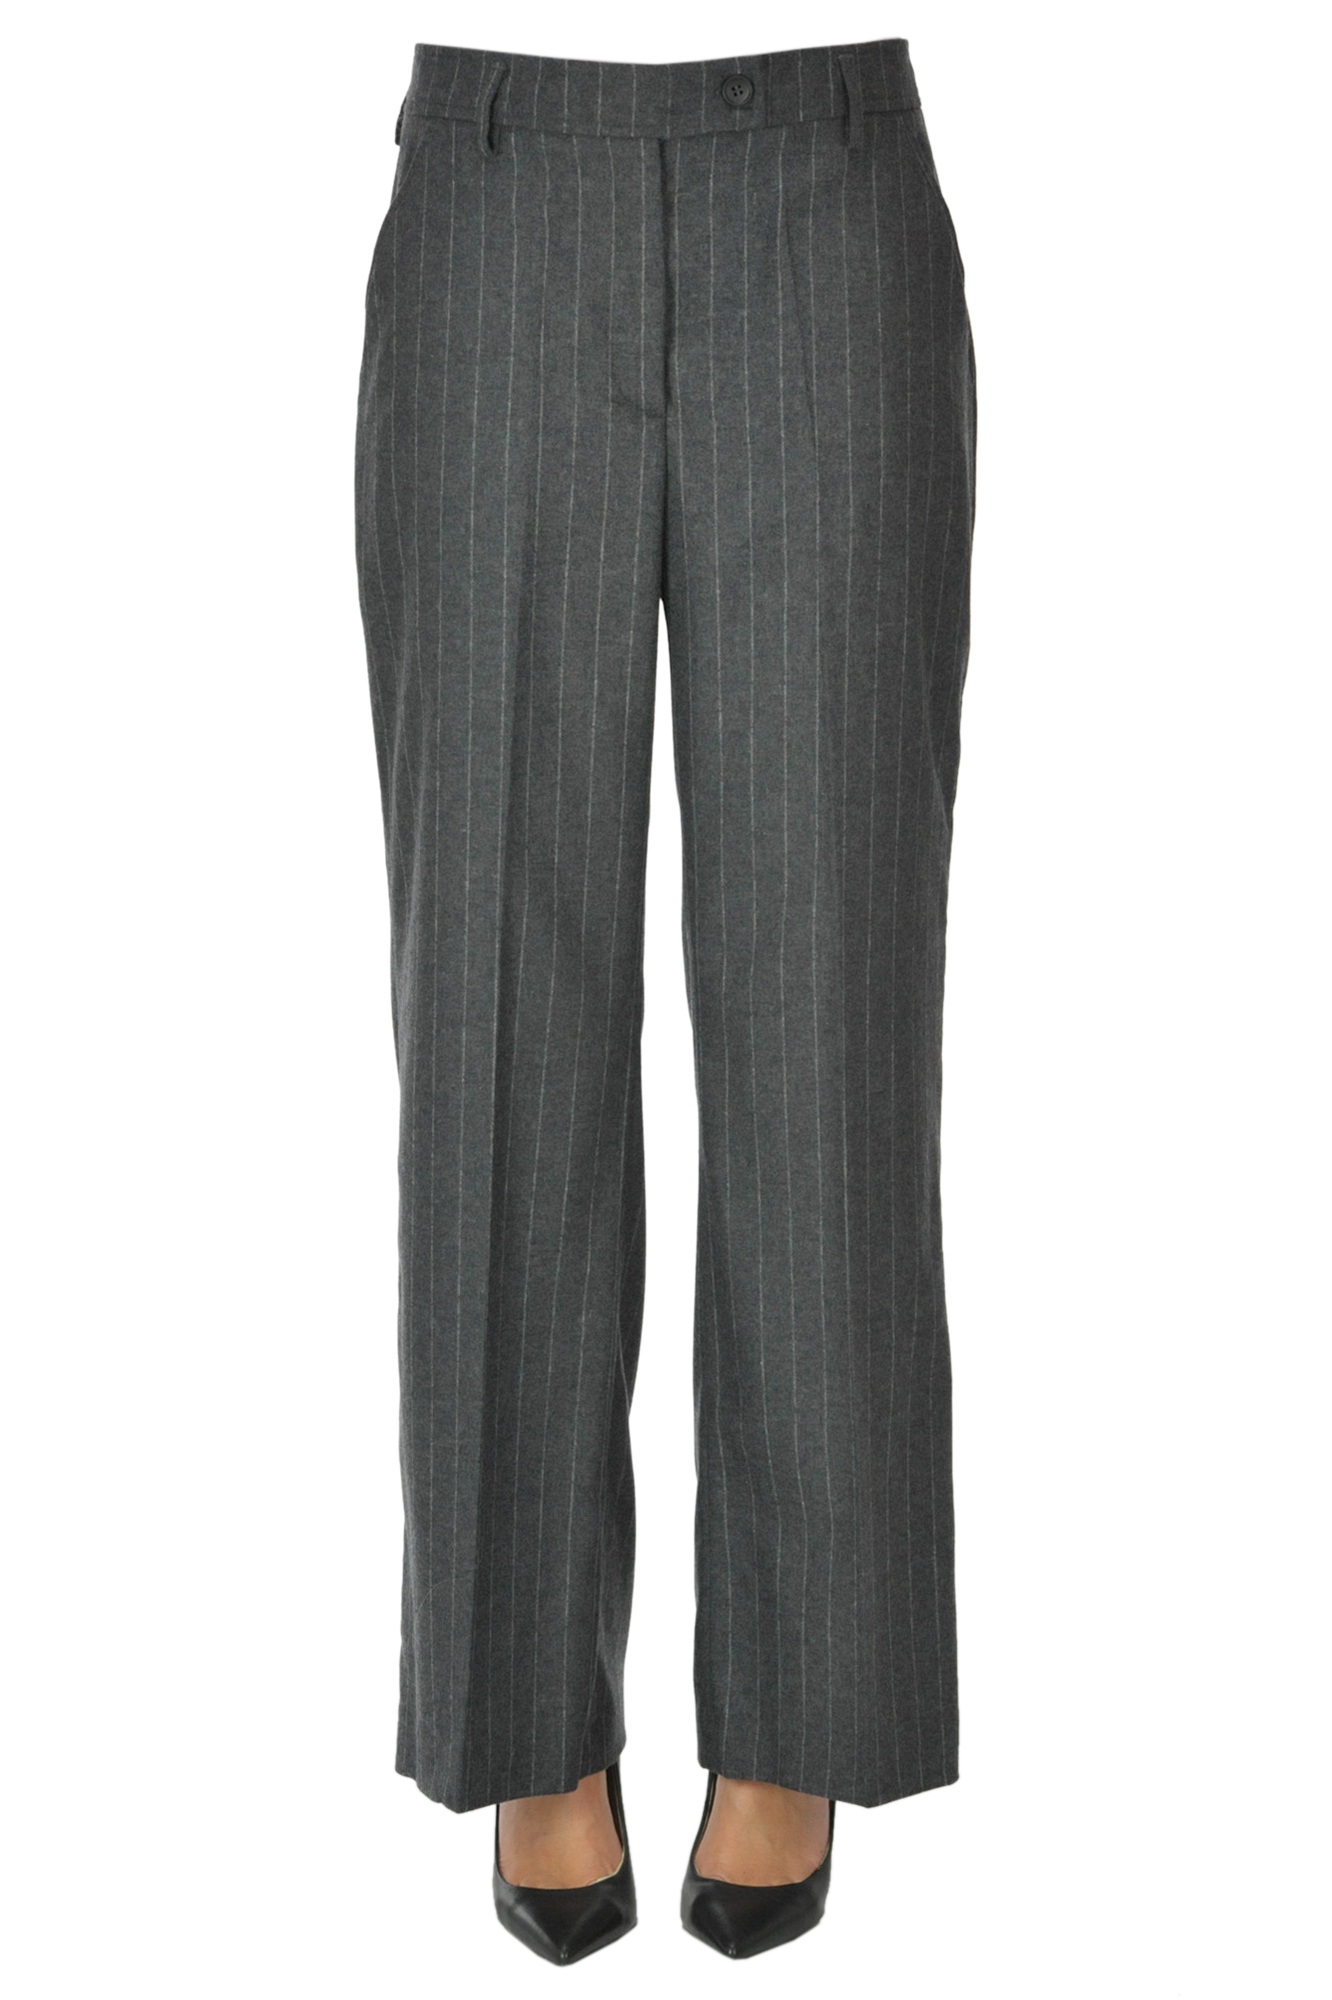 I.c.f. Pinstriped Trousers In Charcoal